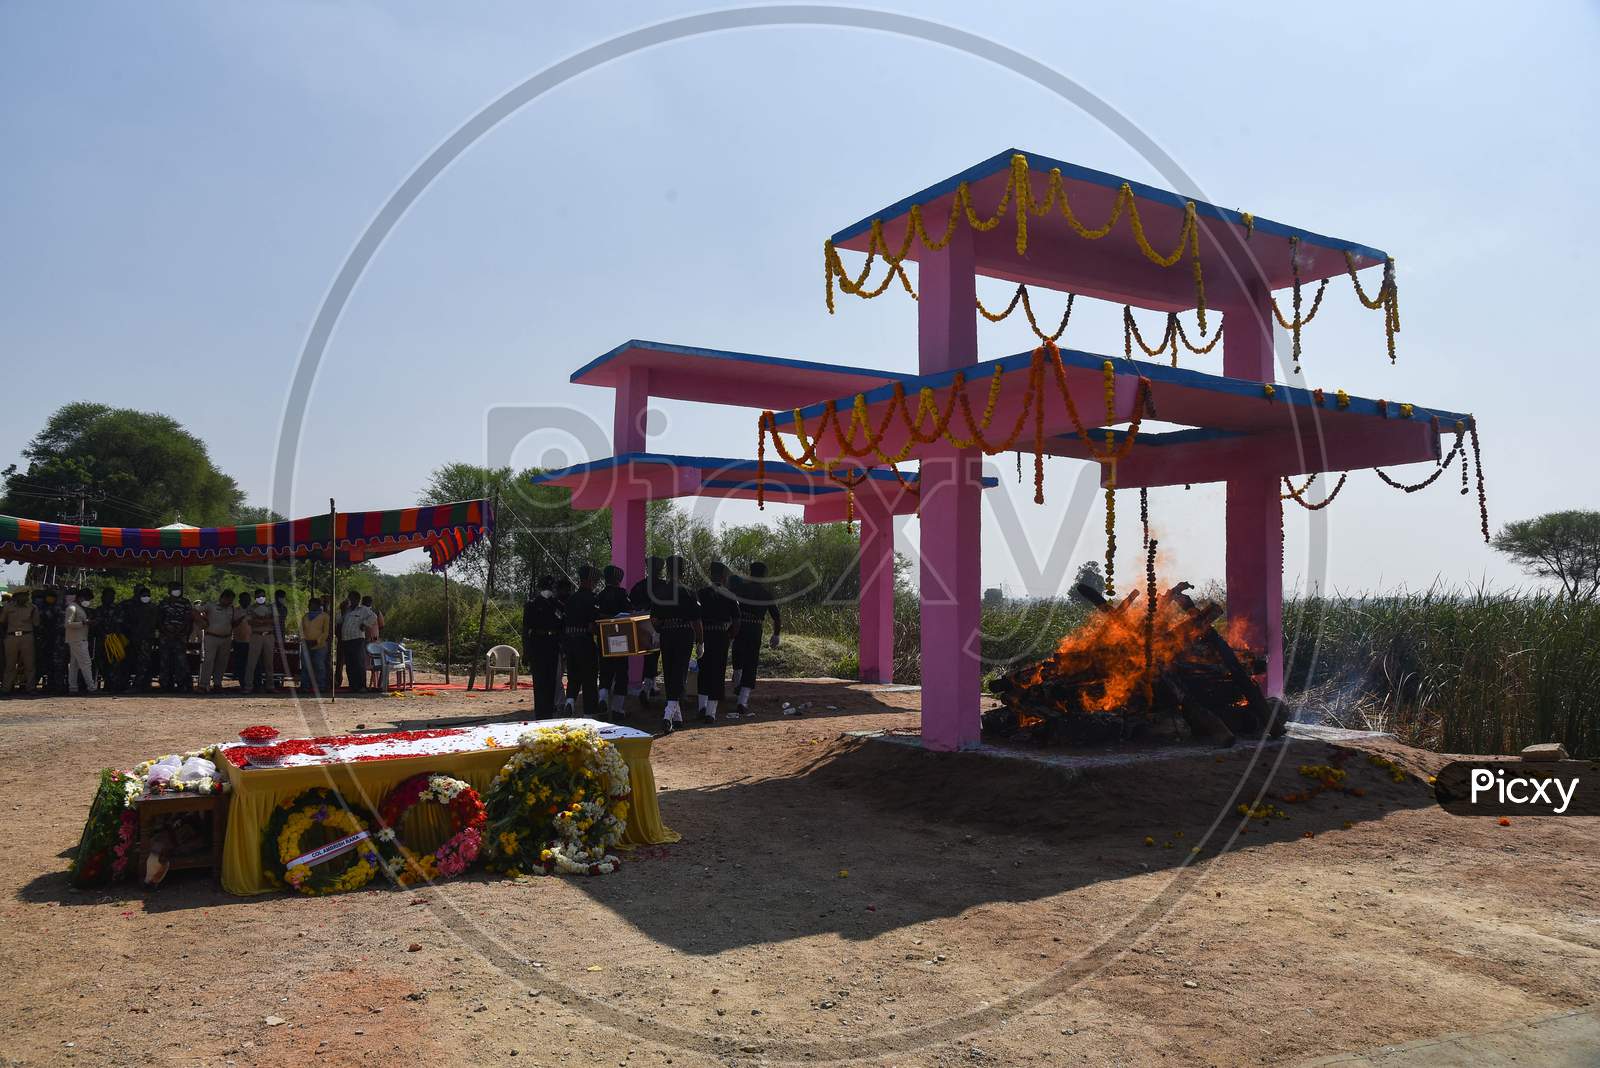 Soldiers at the funeral of soldier Ryada Mahesh, 26, from Telangana's Nizamabad district, who was martyred in the encounter along with three others at Machil sector of Kupwara district in Jammu and Kashmir on Sunday.